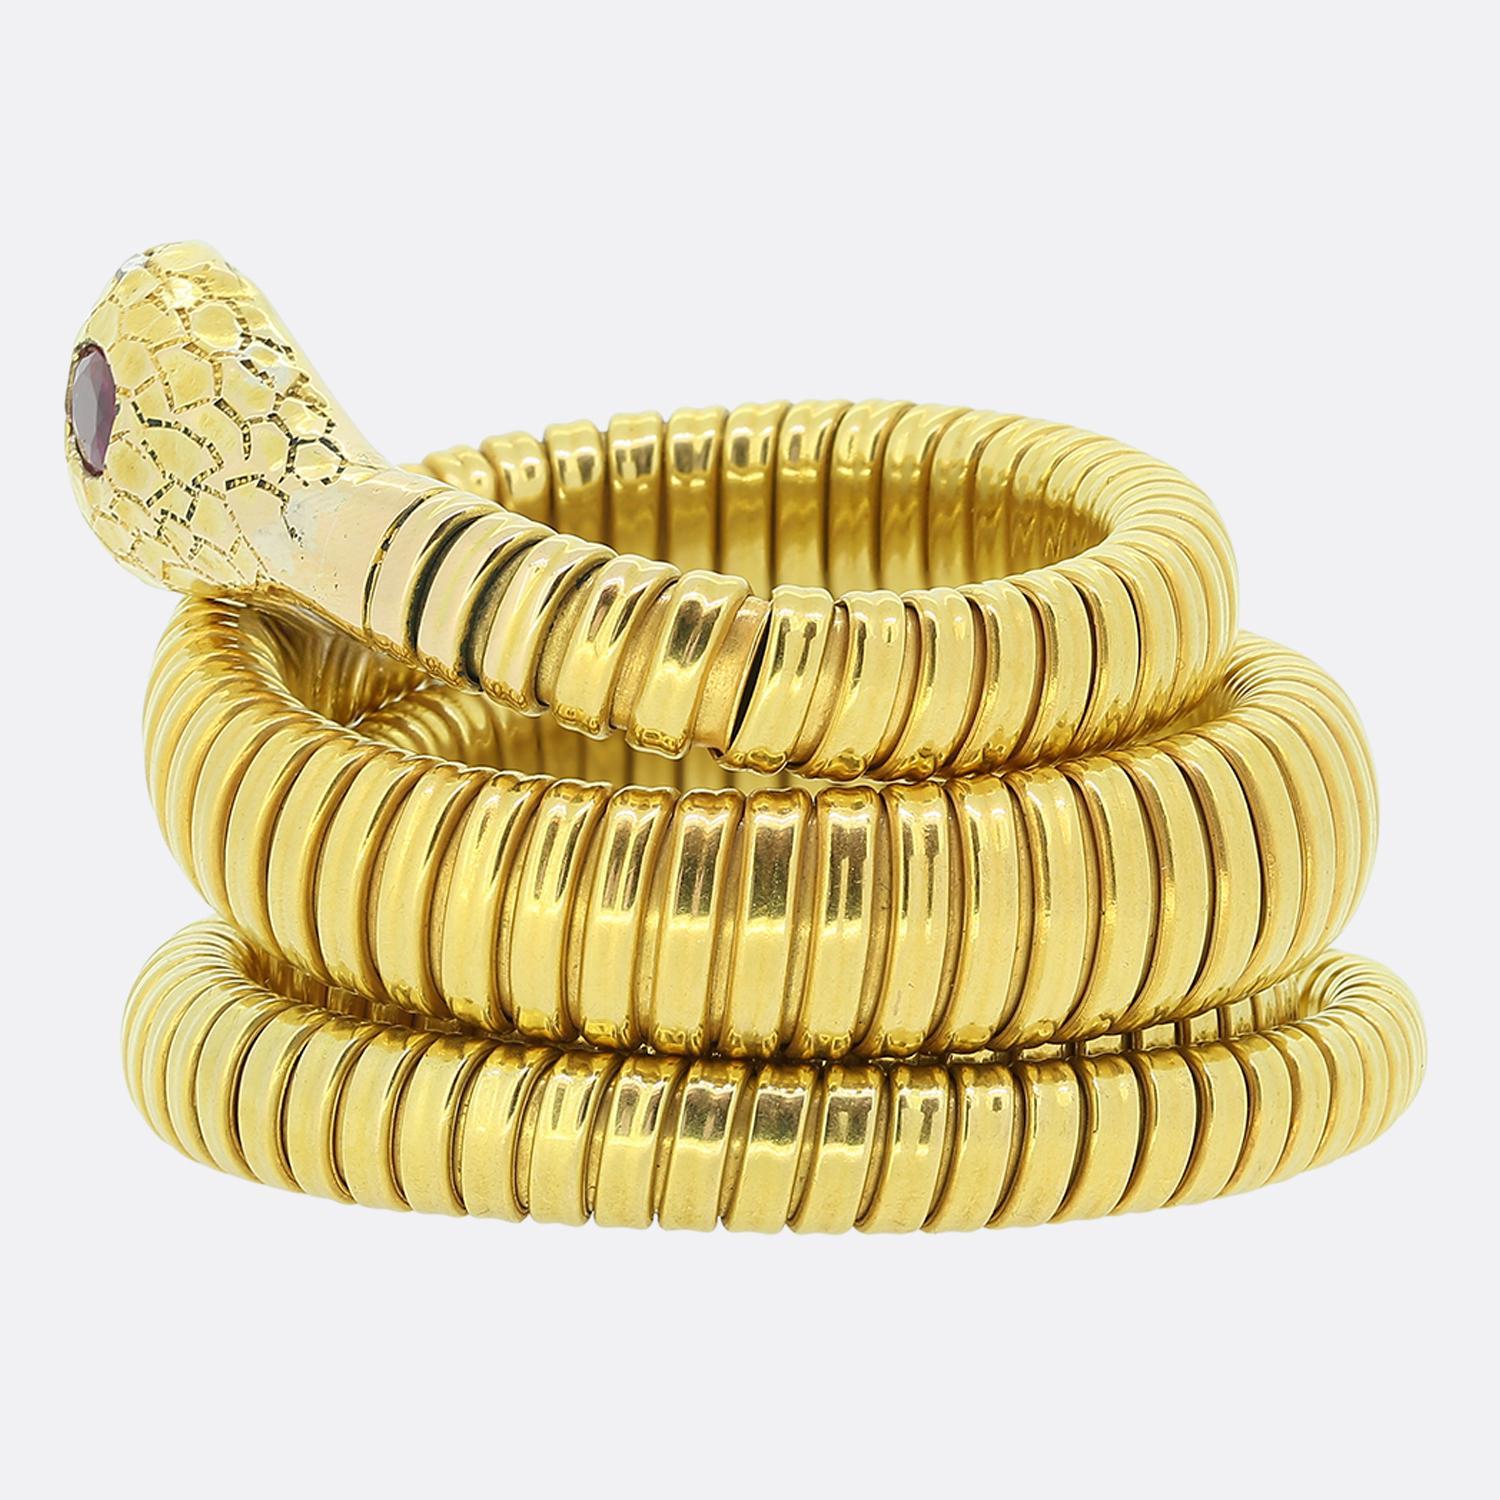 Here we have a remarkable coiled snake bracelet. This antique piece has been crafted from a rich 18ct yellow gold and showcases exceptional attention to detail. Most notably, the layered scaly-like finish to the skin of the body which closely